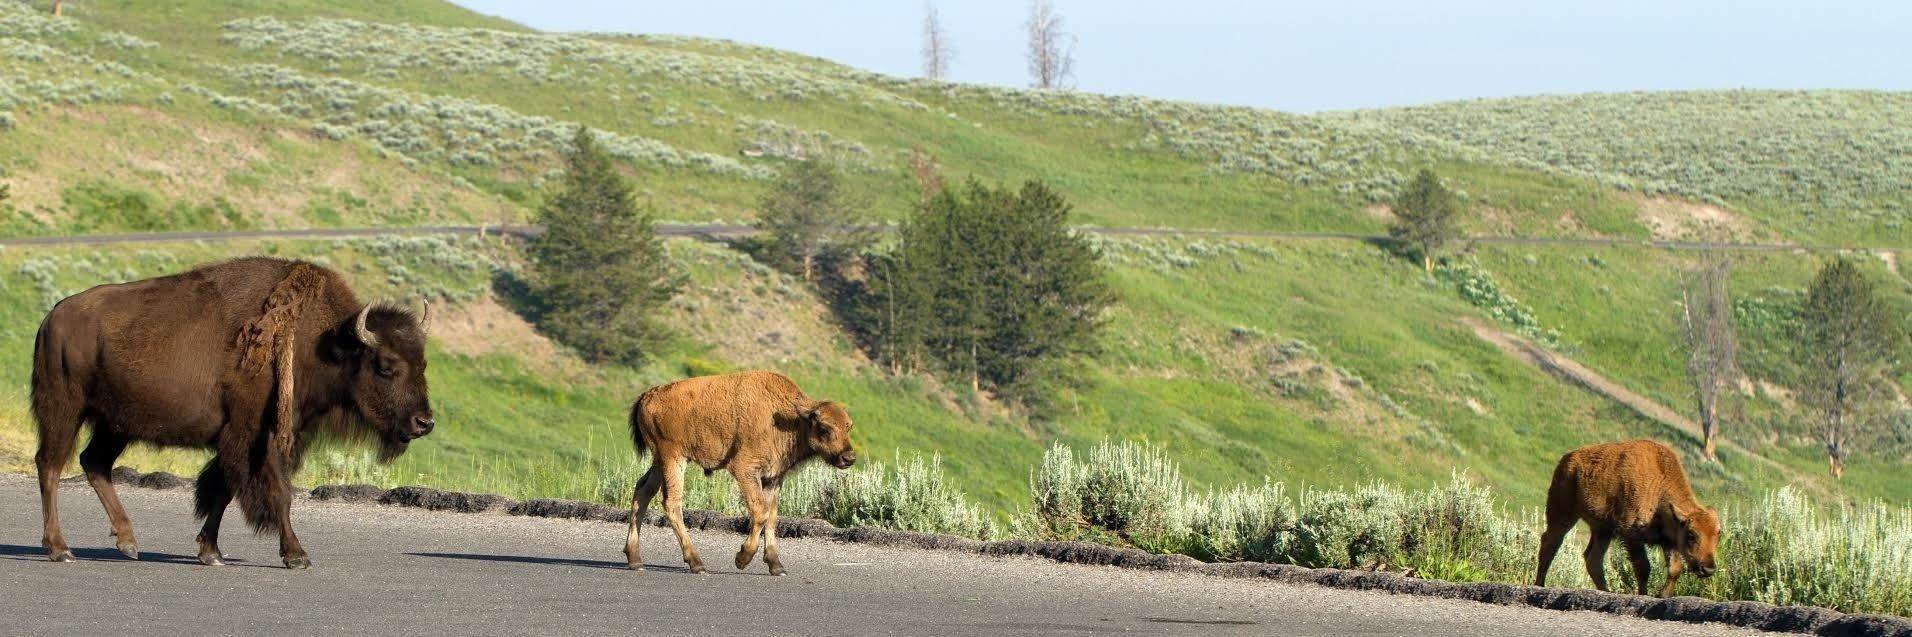  Bison Calf Euthanized After Yellowstone Tourists Put It In Their Vehicle